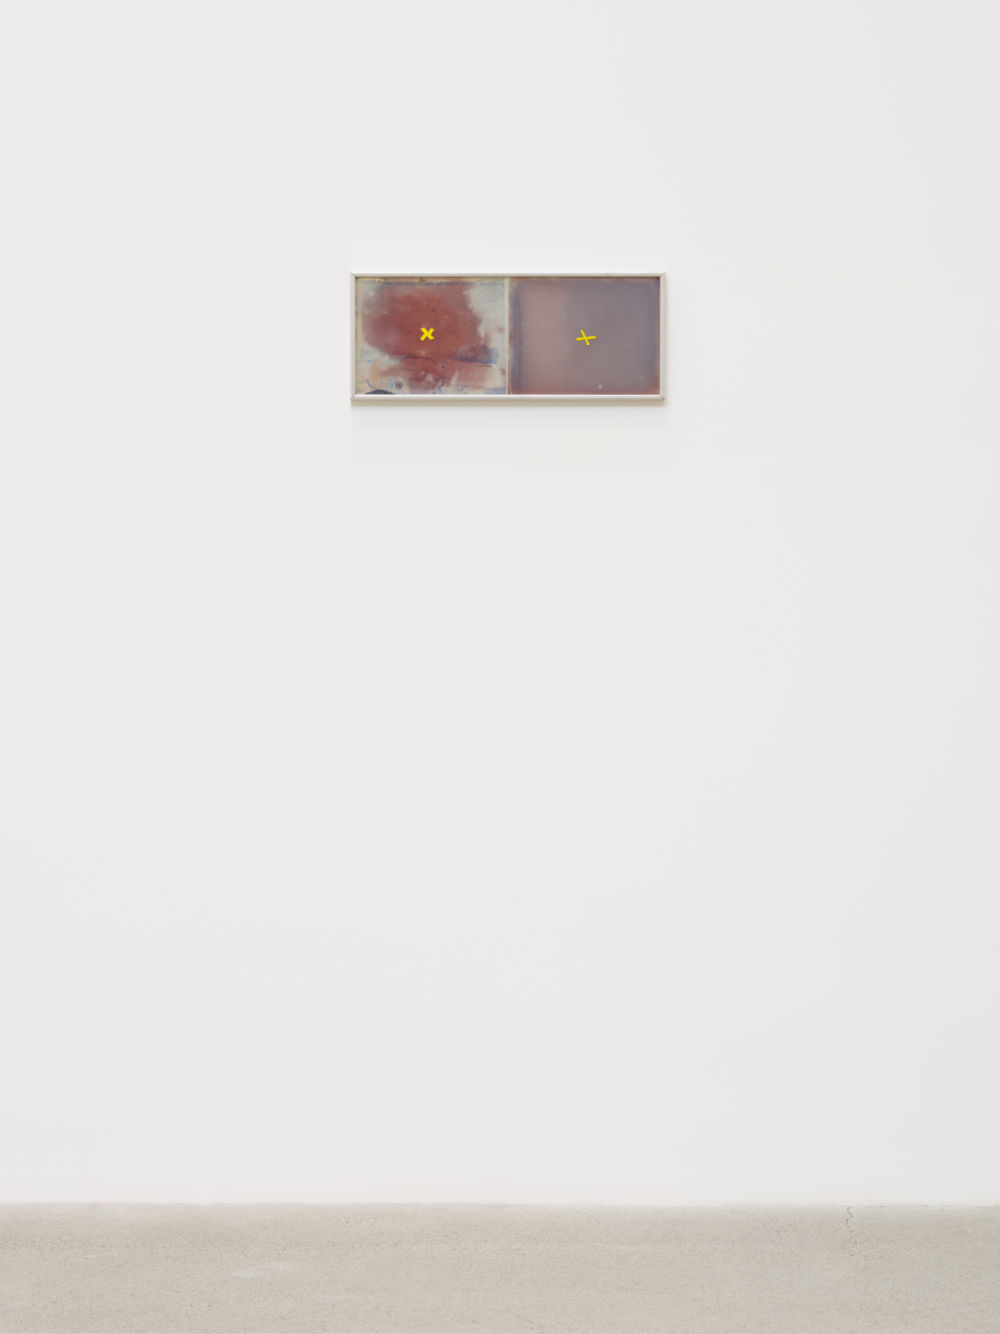 Jerry Pethick, Conjugate, 1969–70, transmission holograms, 7 1/4 x 20 1/4 in. (18 x 51 cm) by 